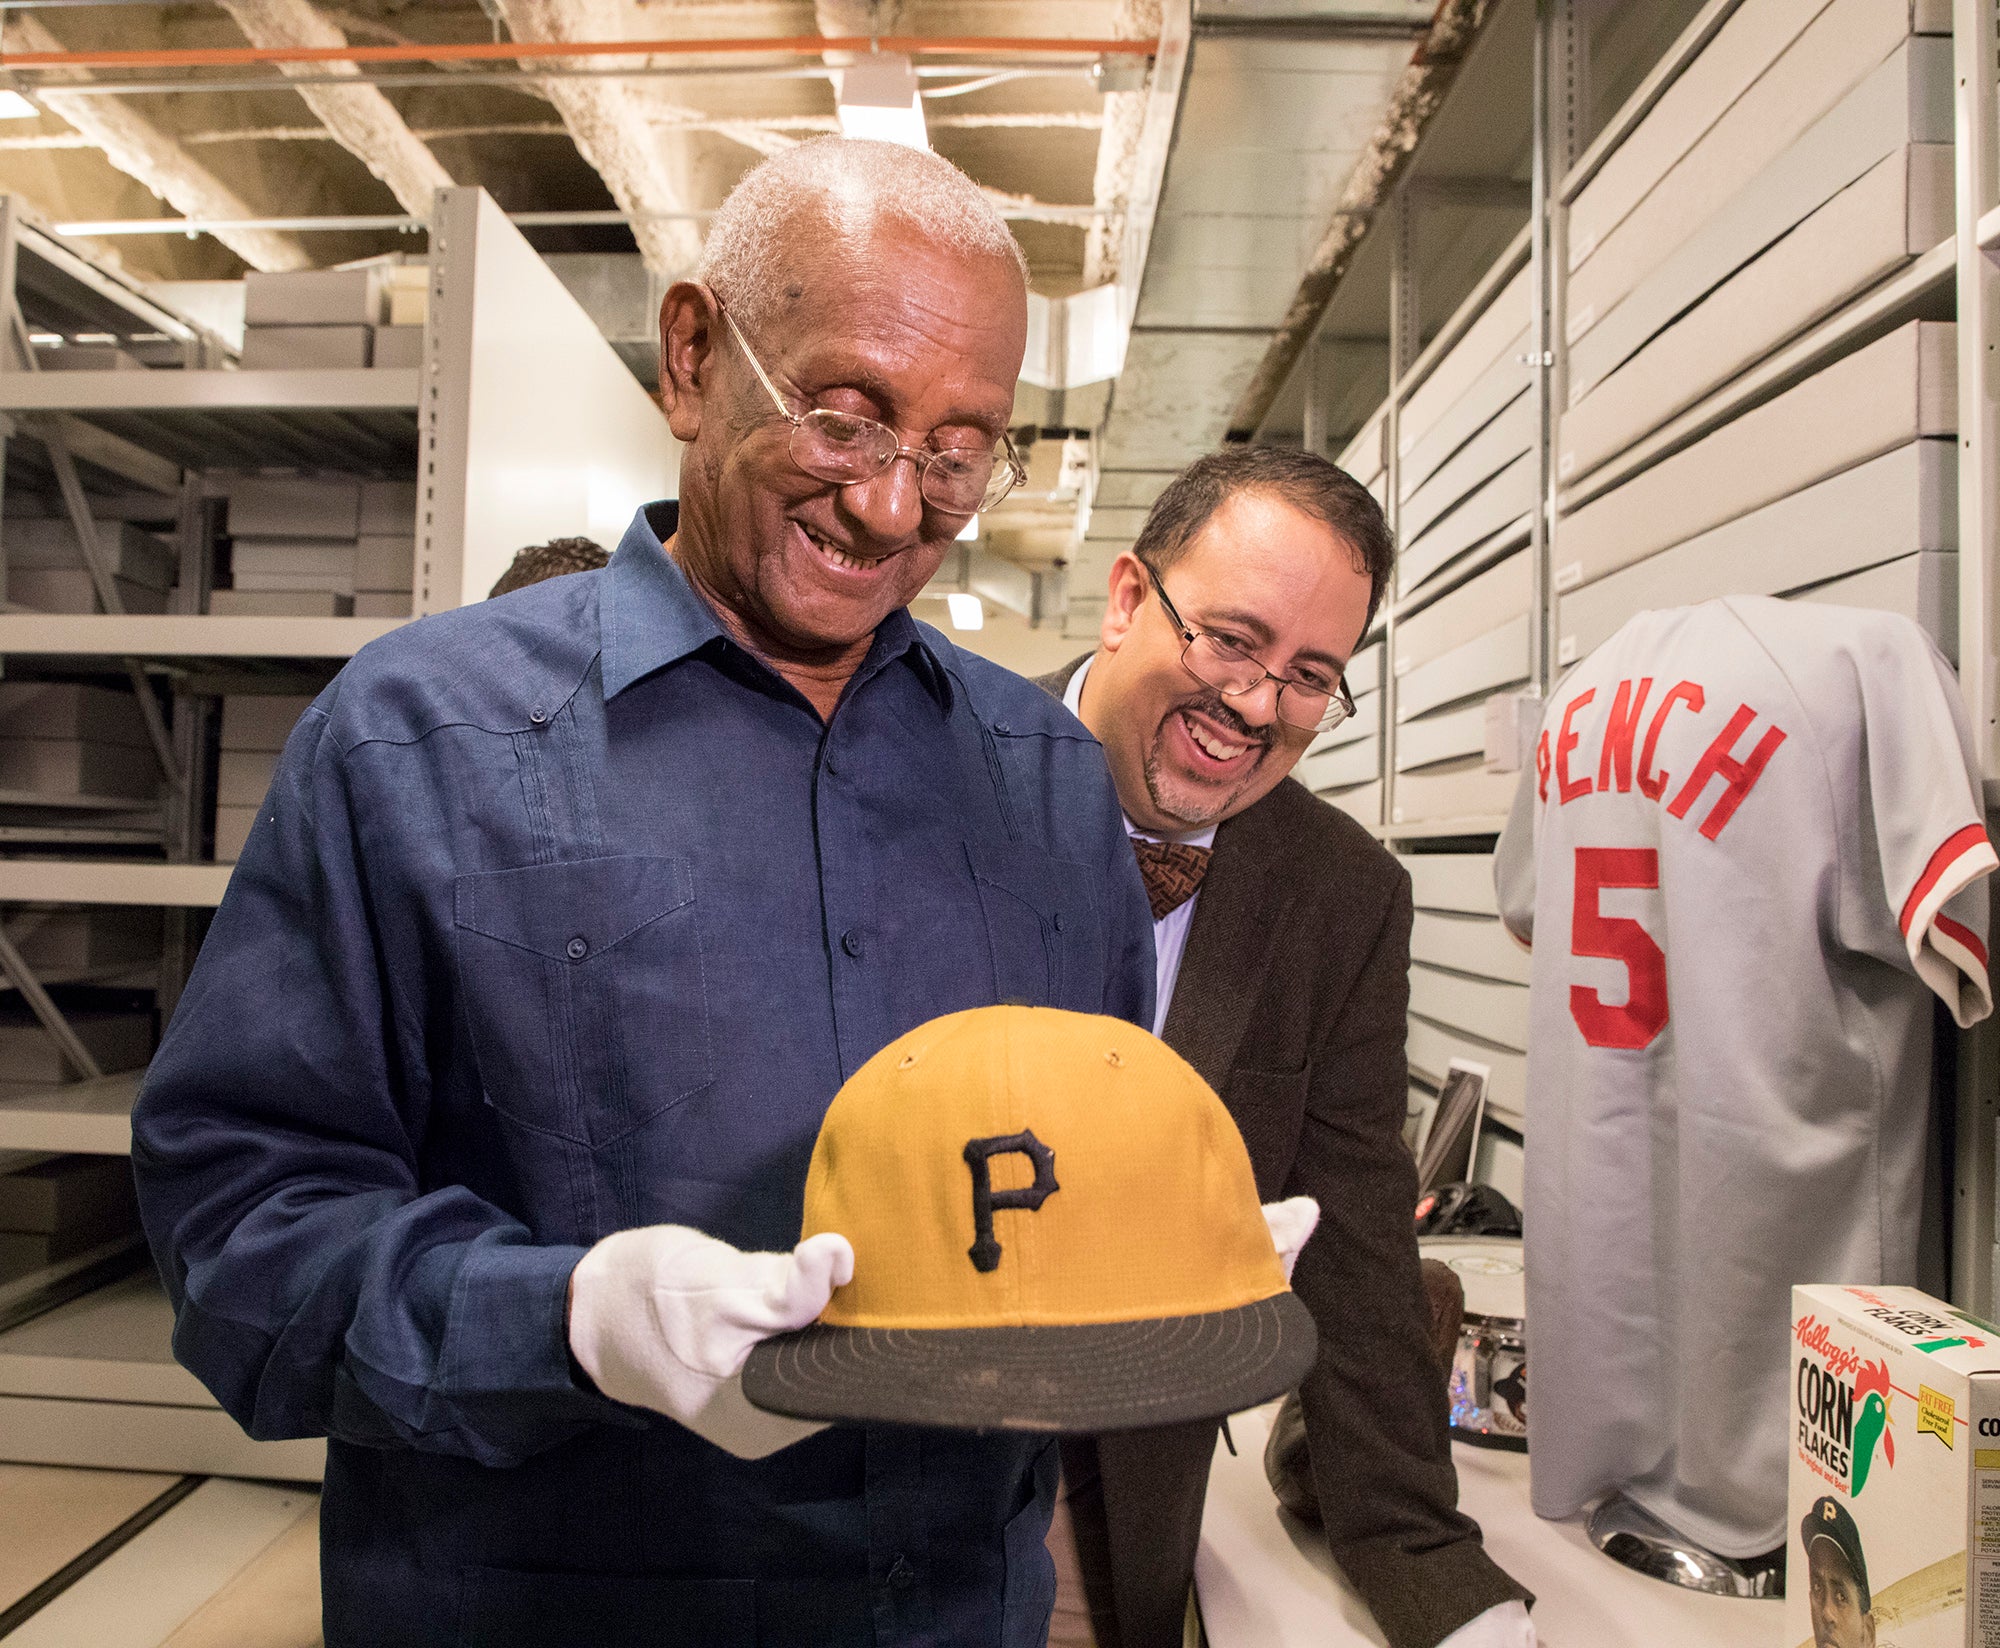 Justino Clemente, brother of Roberto, visits Hall of Fame